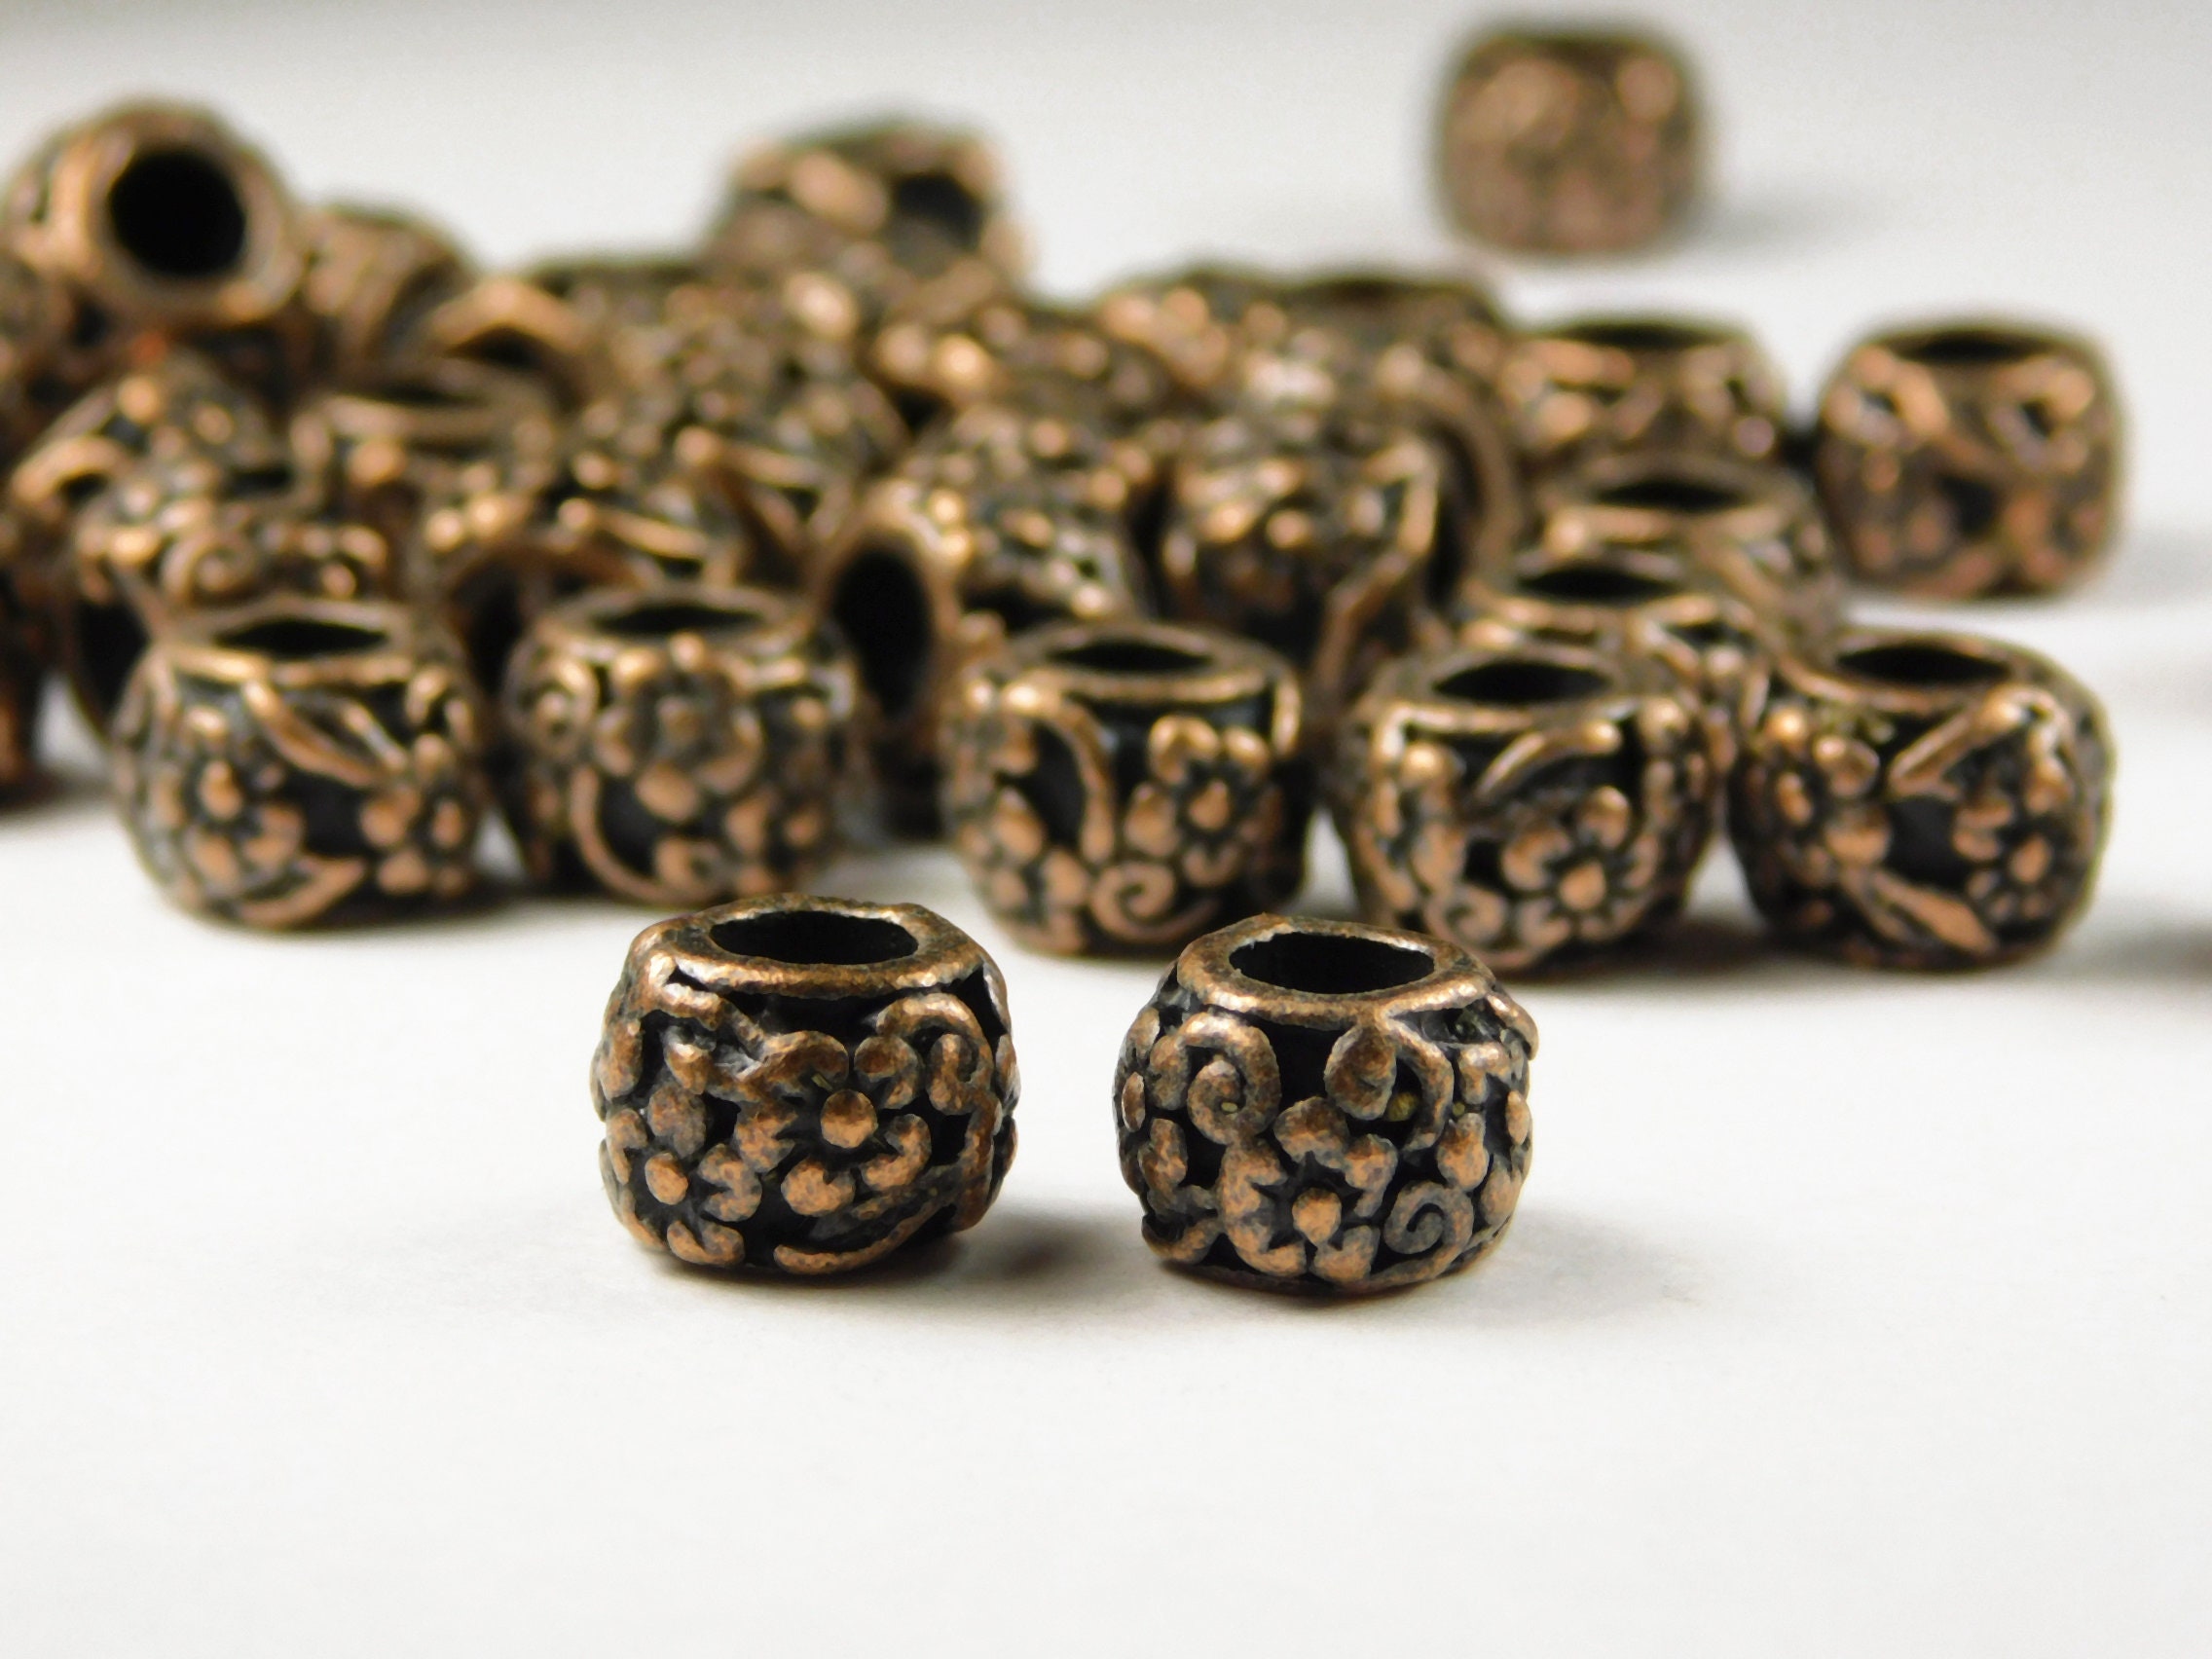 Metal Loose Big Hole Spacer Beads For Jewelry Making Findings Bracelet  Necklace DIY D 69299f From Ai805, $14.74